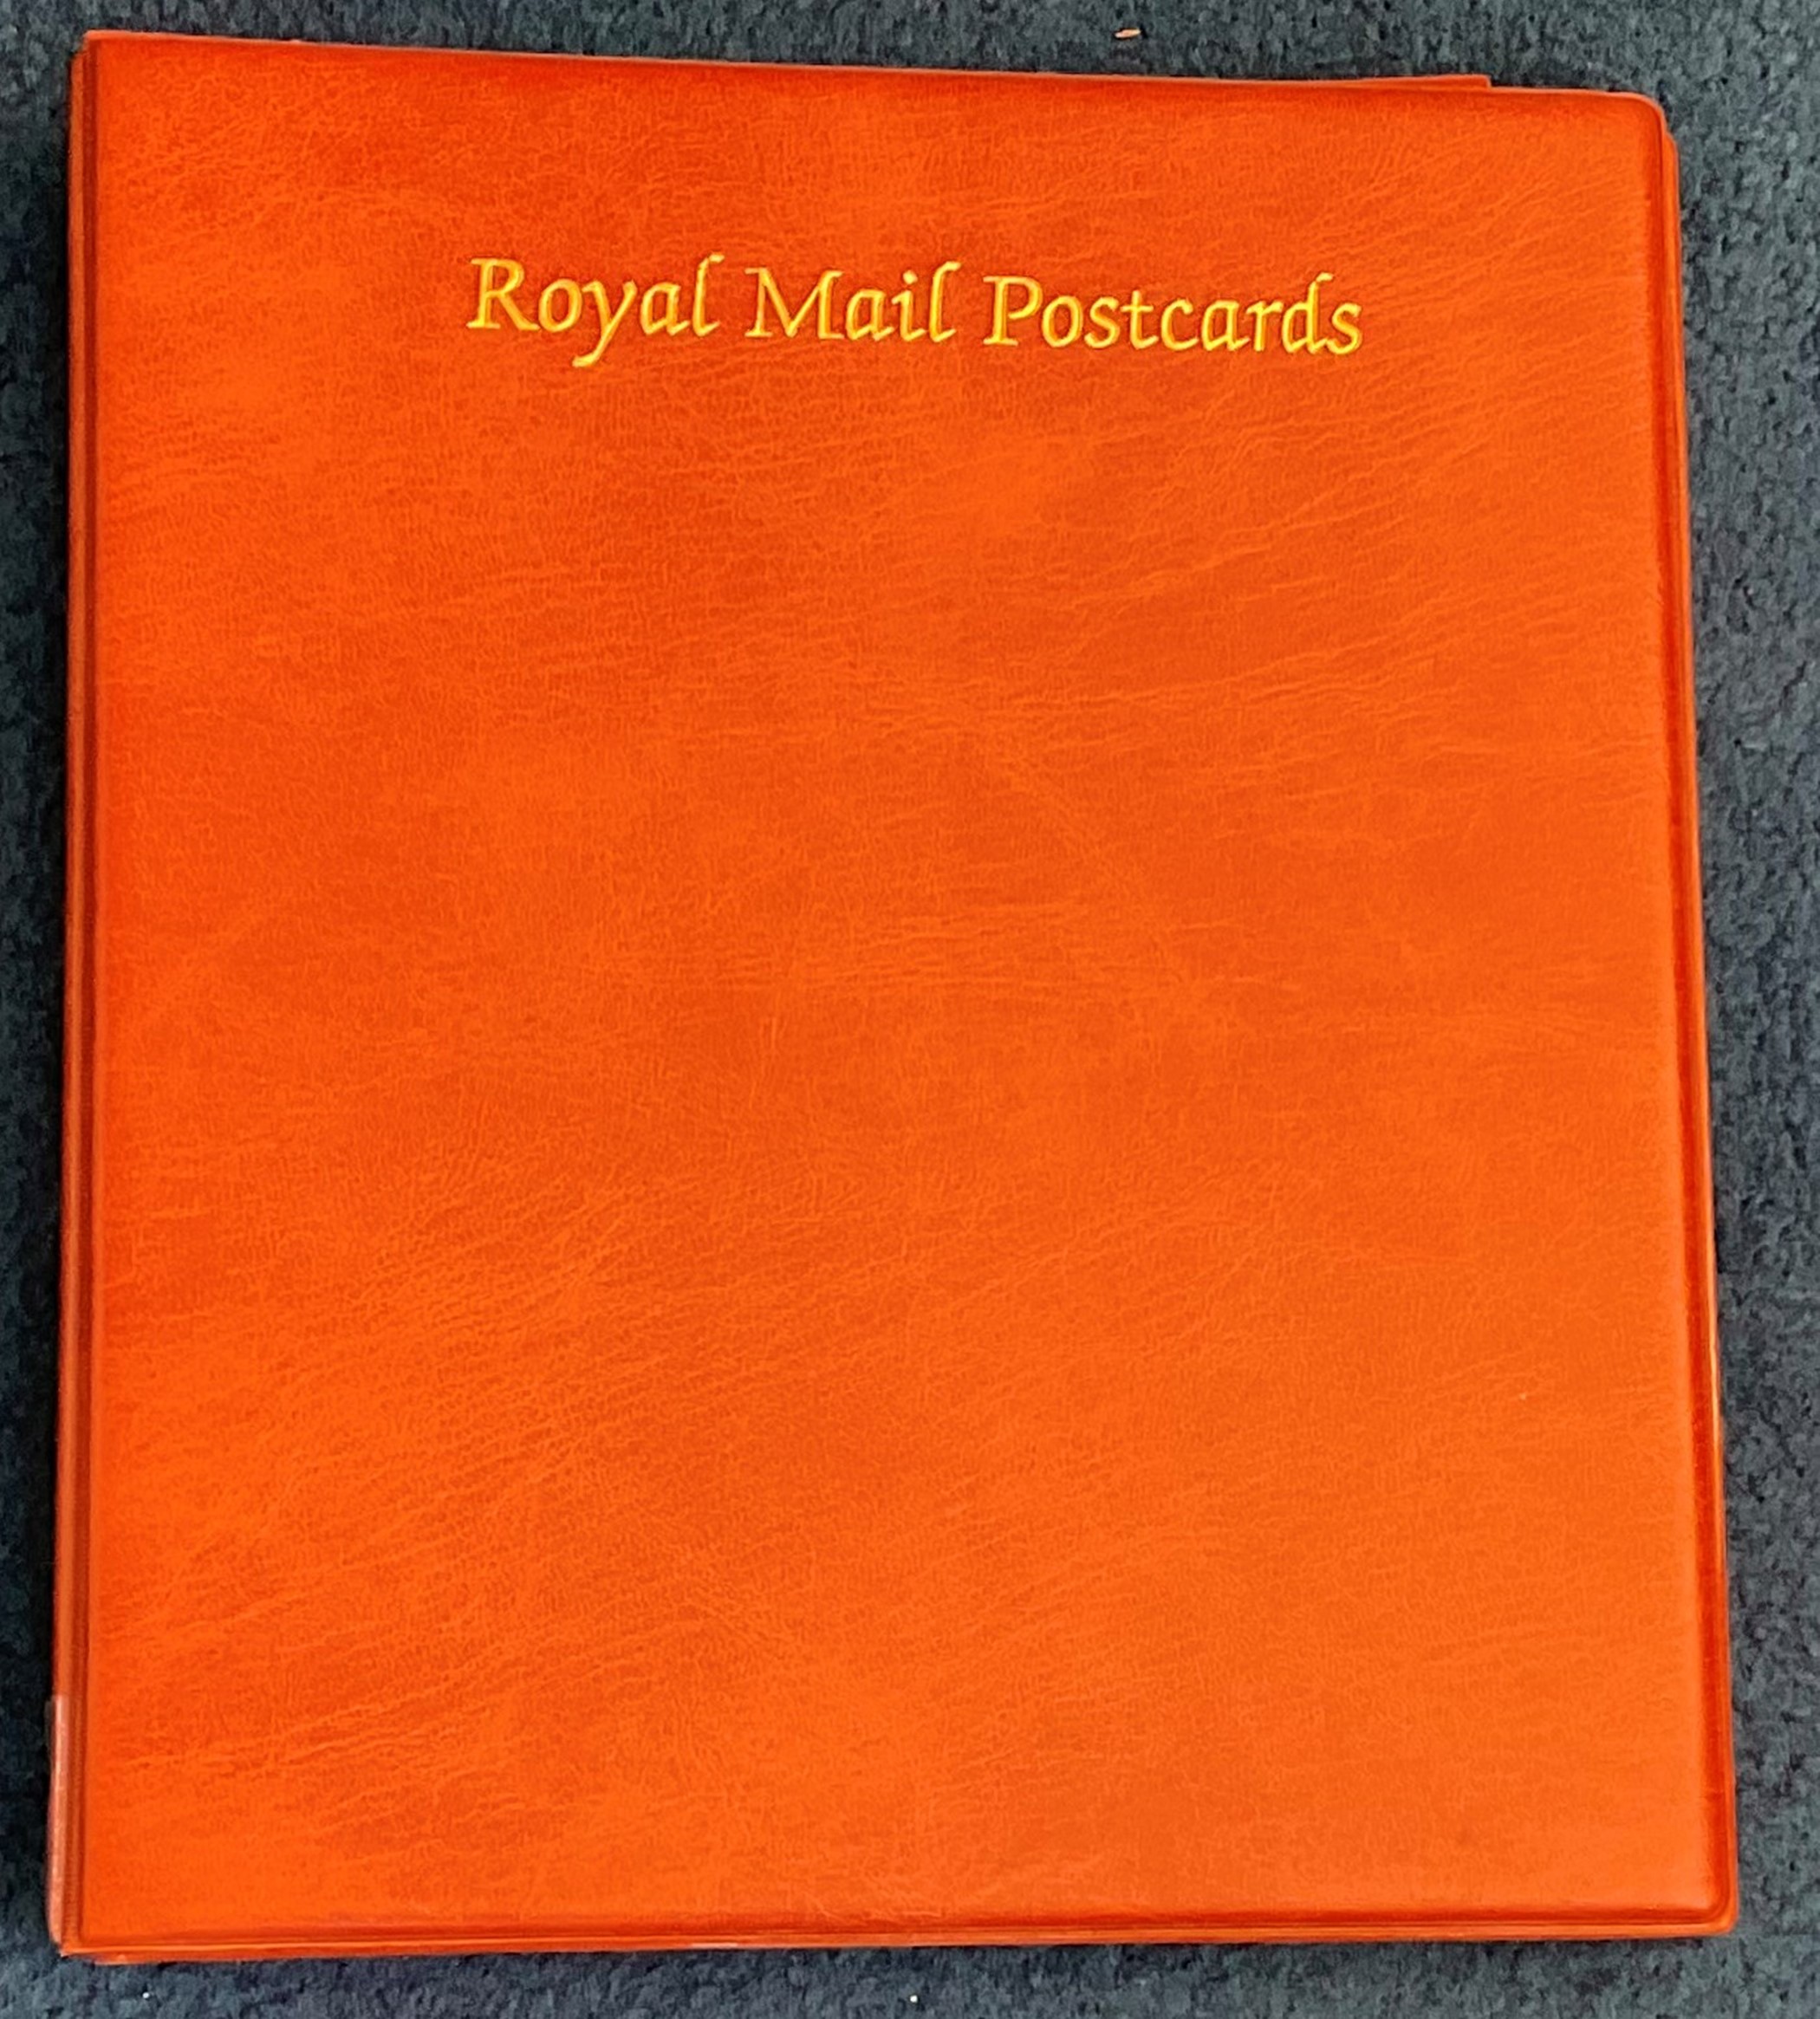 Royal Mail postcards album. EMPTY. 22 sleeves included. Colour brown. Good condition. We combine